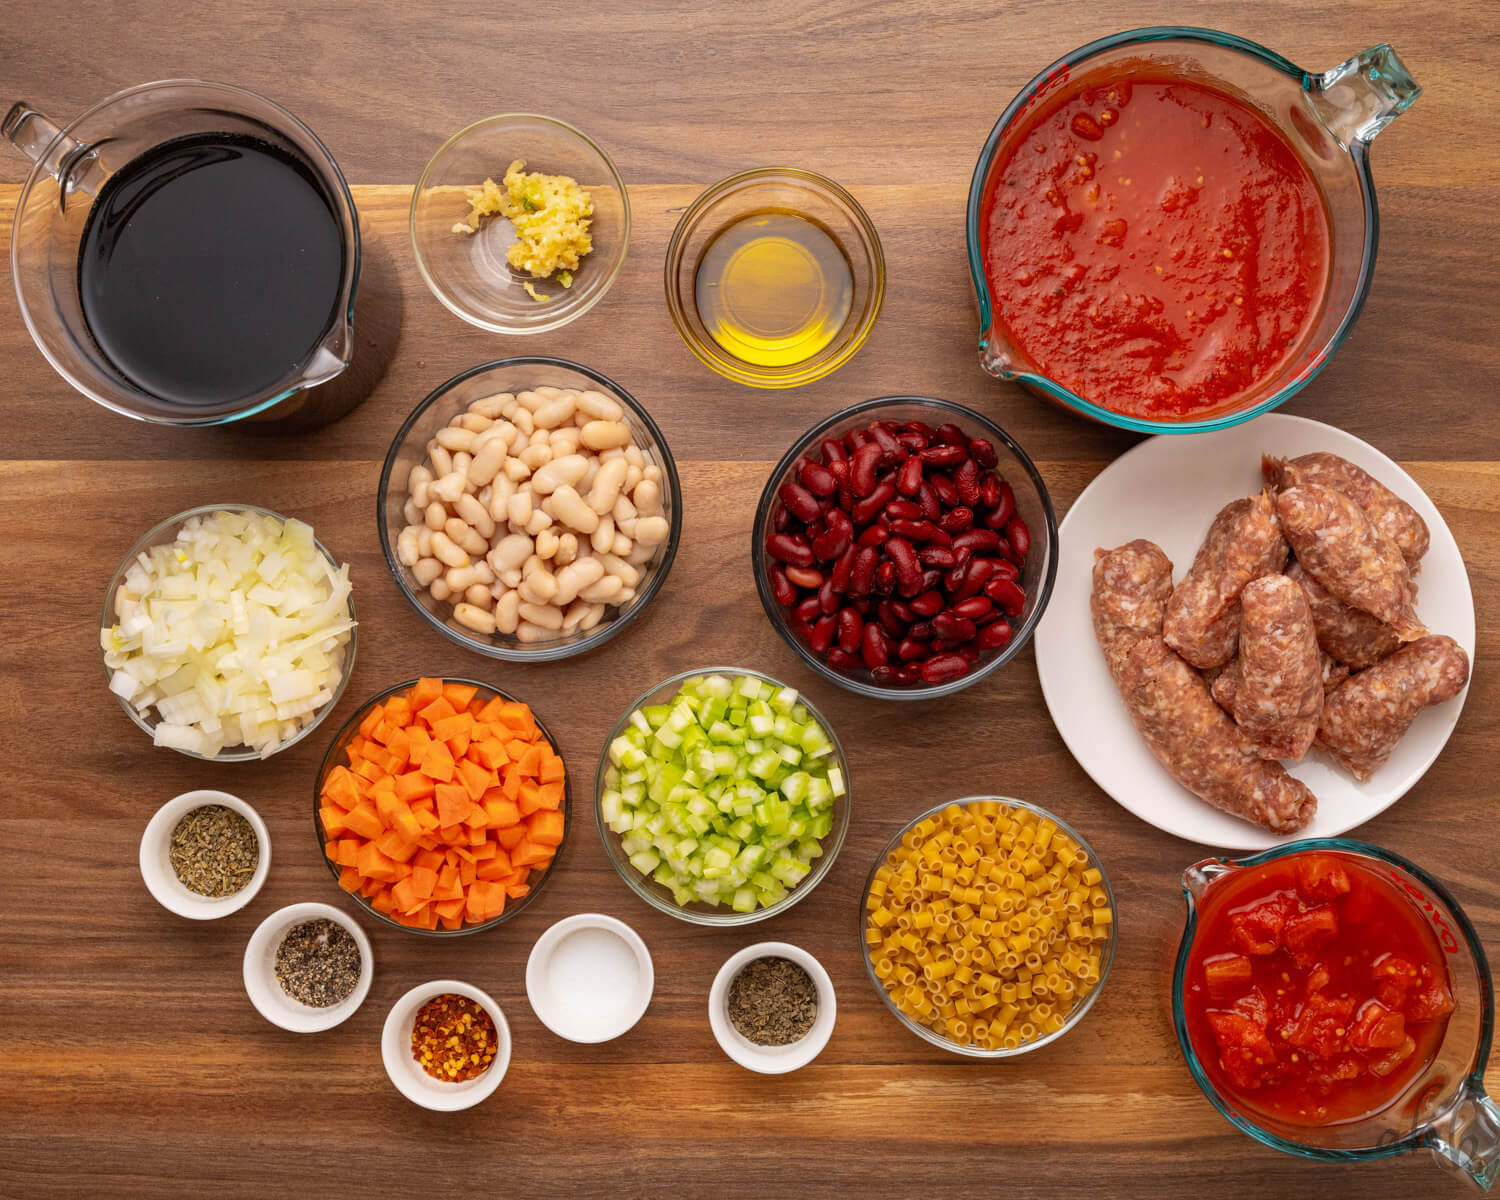 The ingredients of pasta fagioli are measured out in dishes and are ready to be combined.